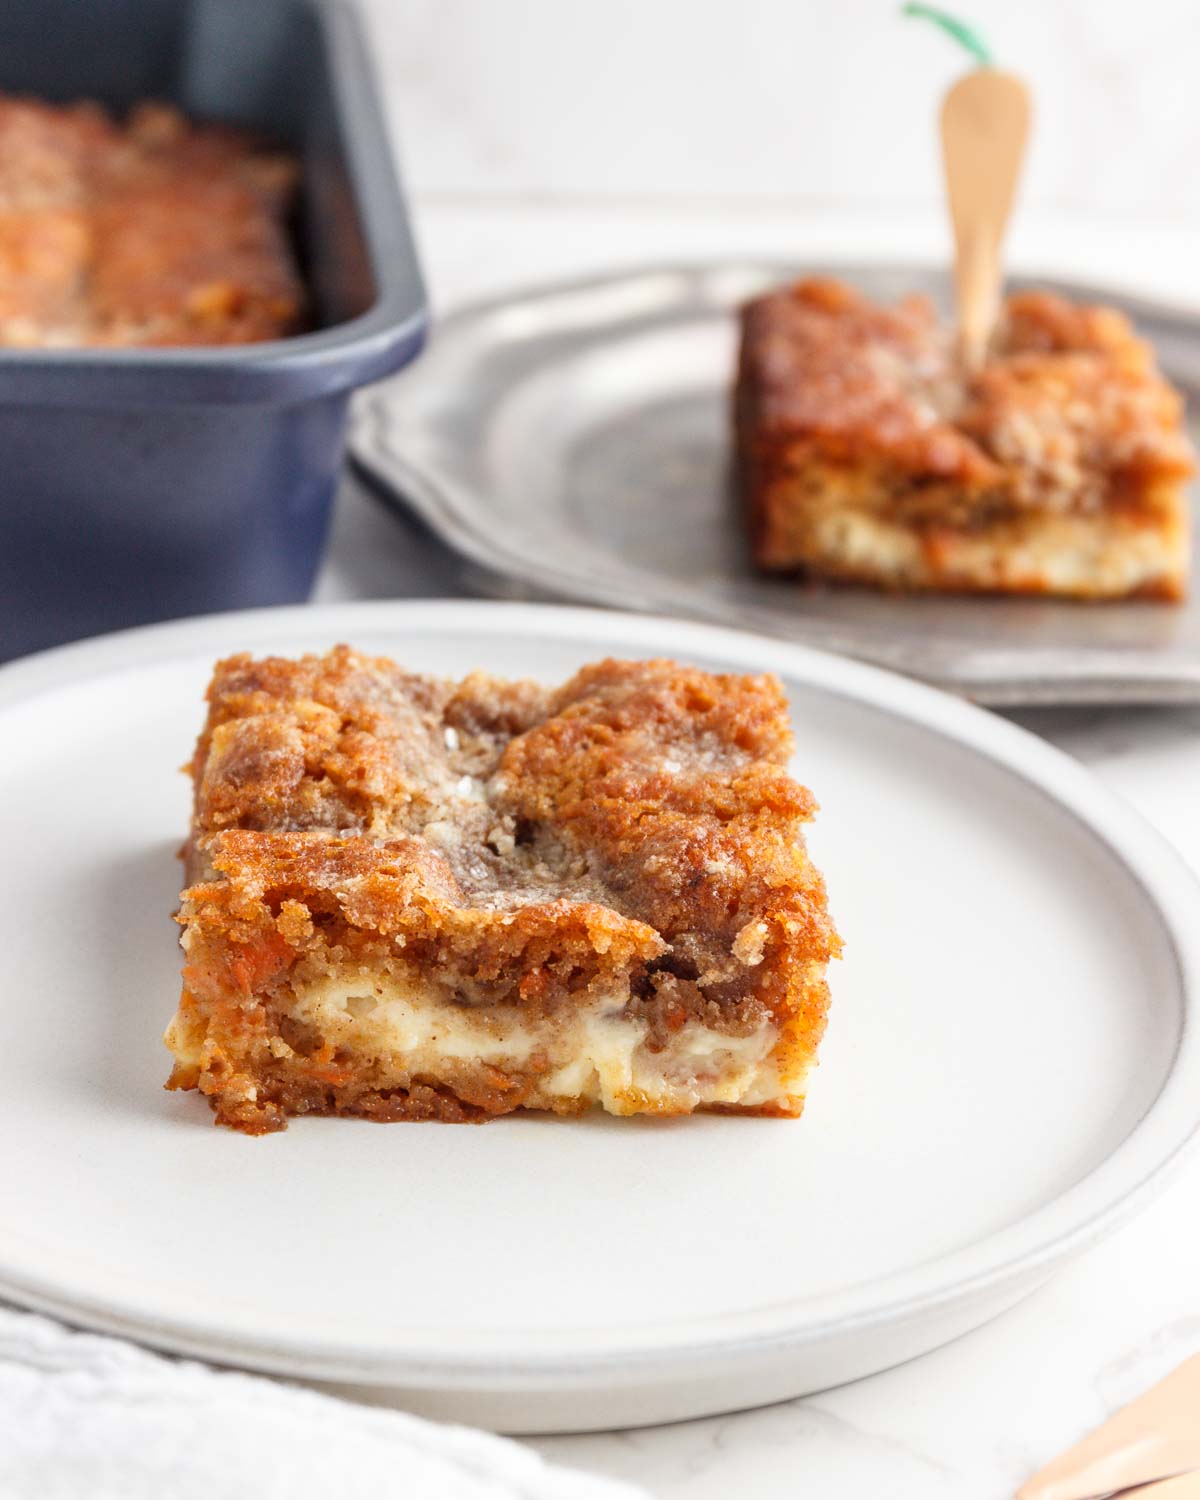  A square of Low Carb Carrot Coffee Cake with a pan of cake behind it.